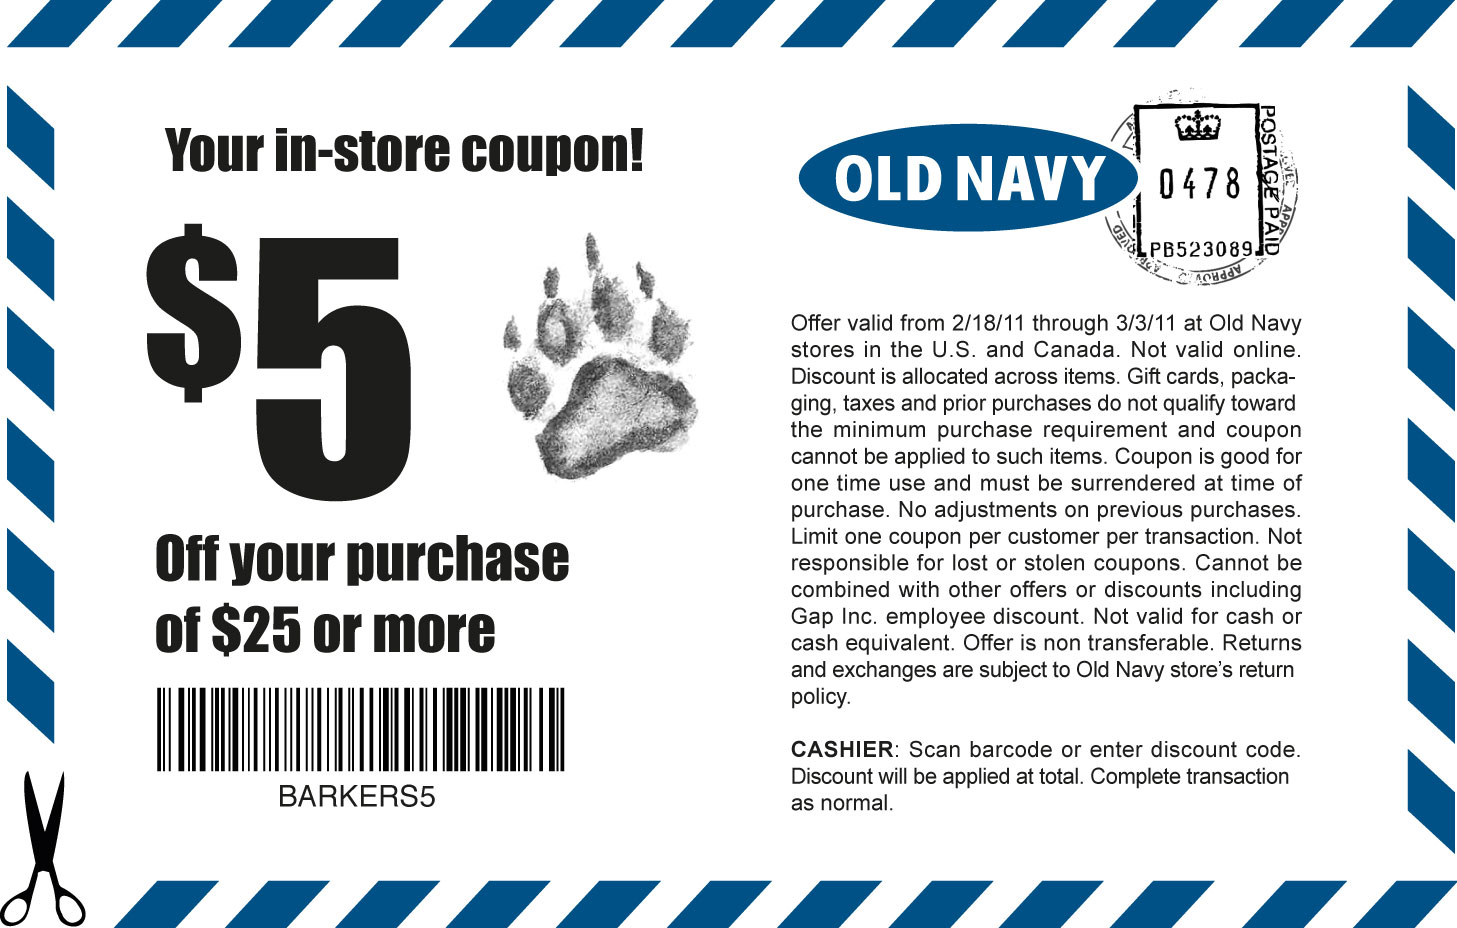 Just a reminder that the Old Navy 5 off 25 in-store coupon expires ...